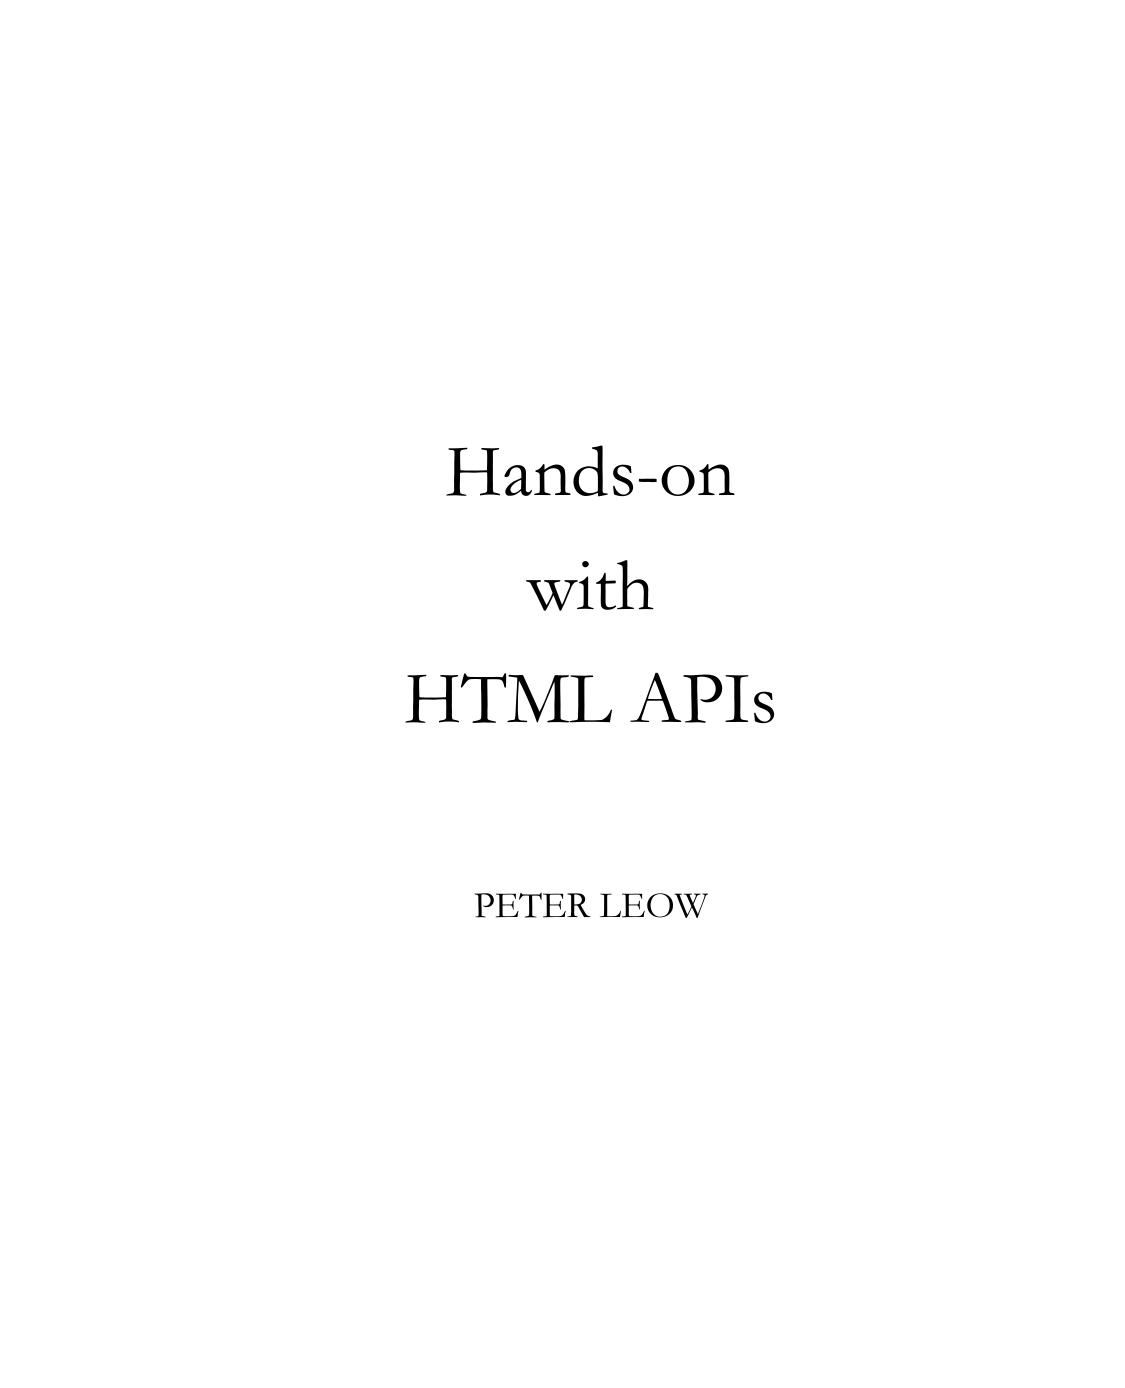 Hands-On With HTML APIs: Harness the Power of HTML APIs